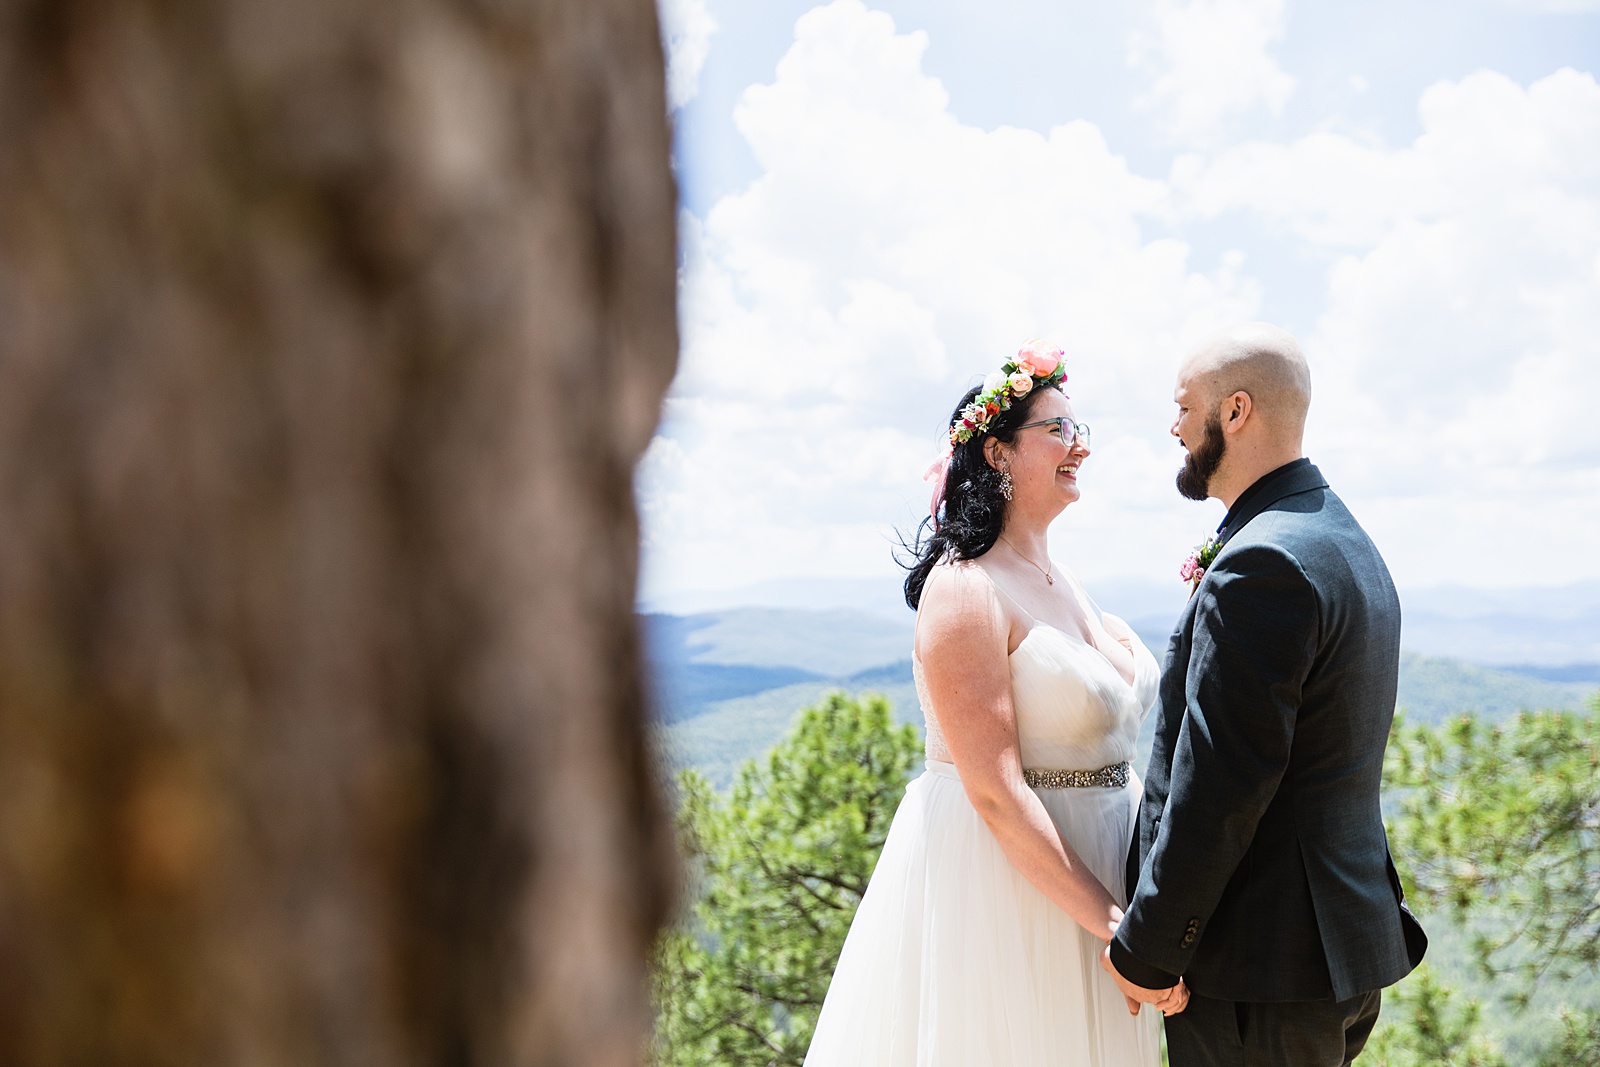 Bride & Groom share an intimate moment at their Mogollon Rim elopement by Arizona elopement photographer PMA Photography.